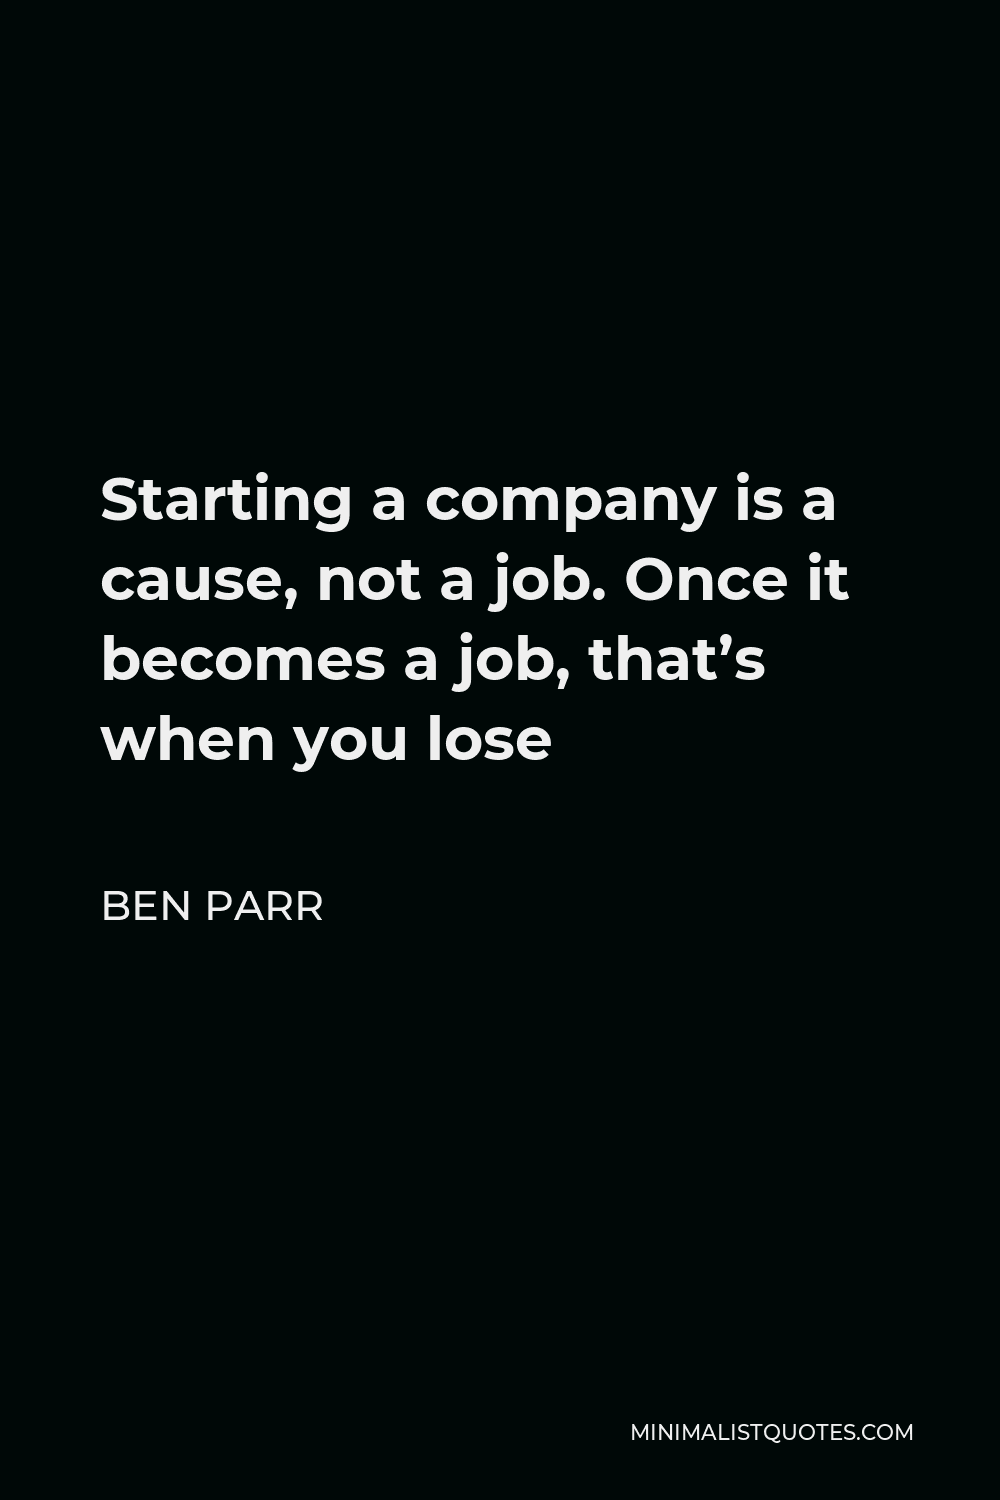 Ben Parr Quote - Starting a company is a cause, not a job. Once it becomes a job, that’s when you lose